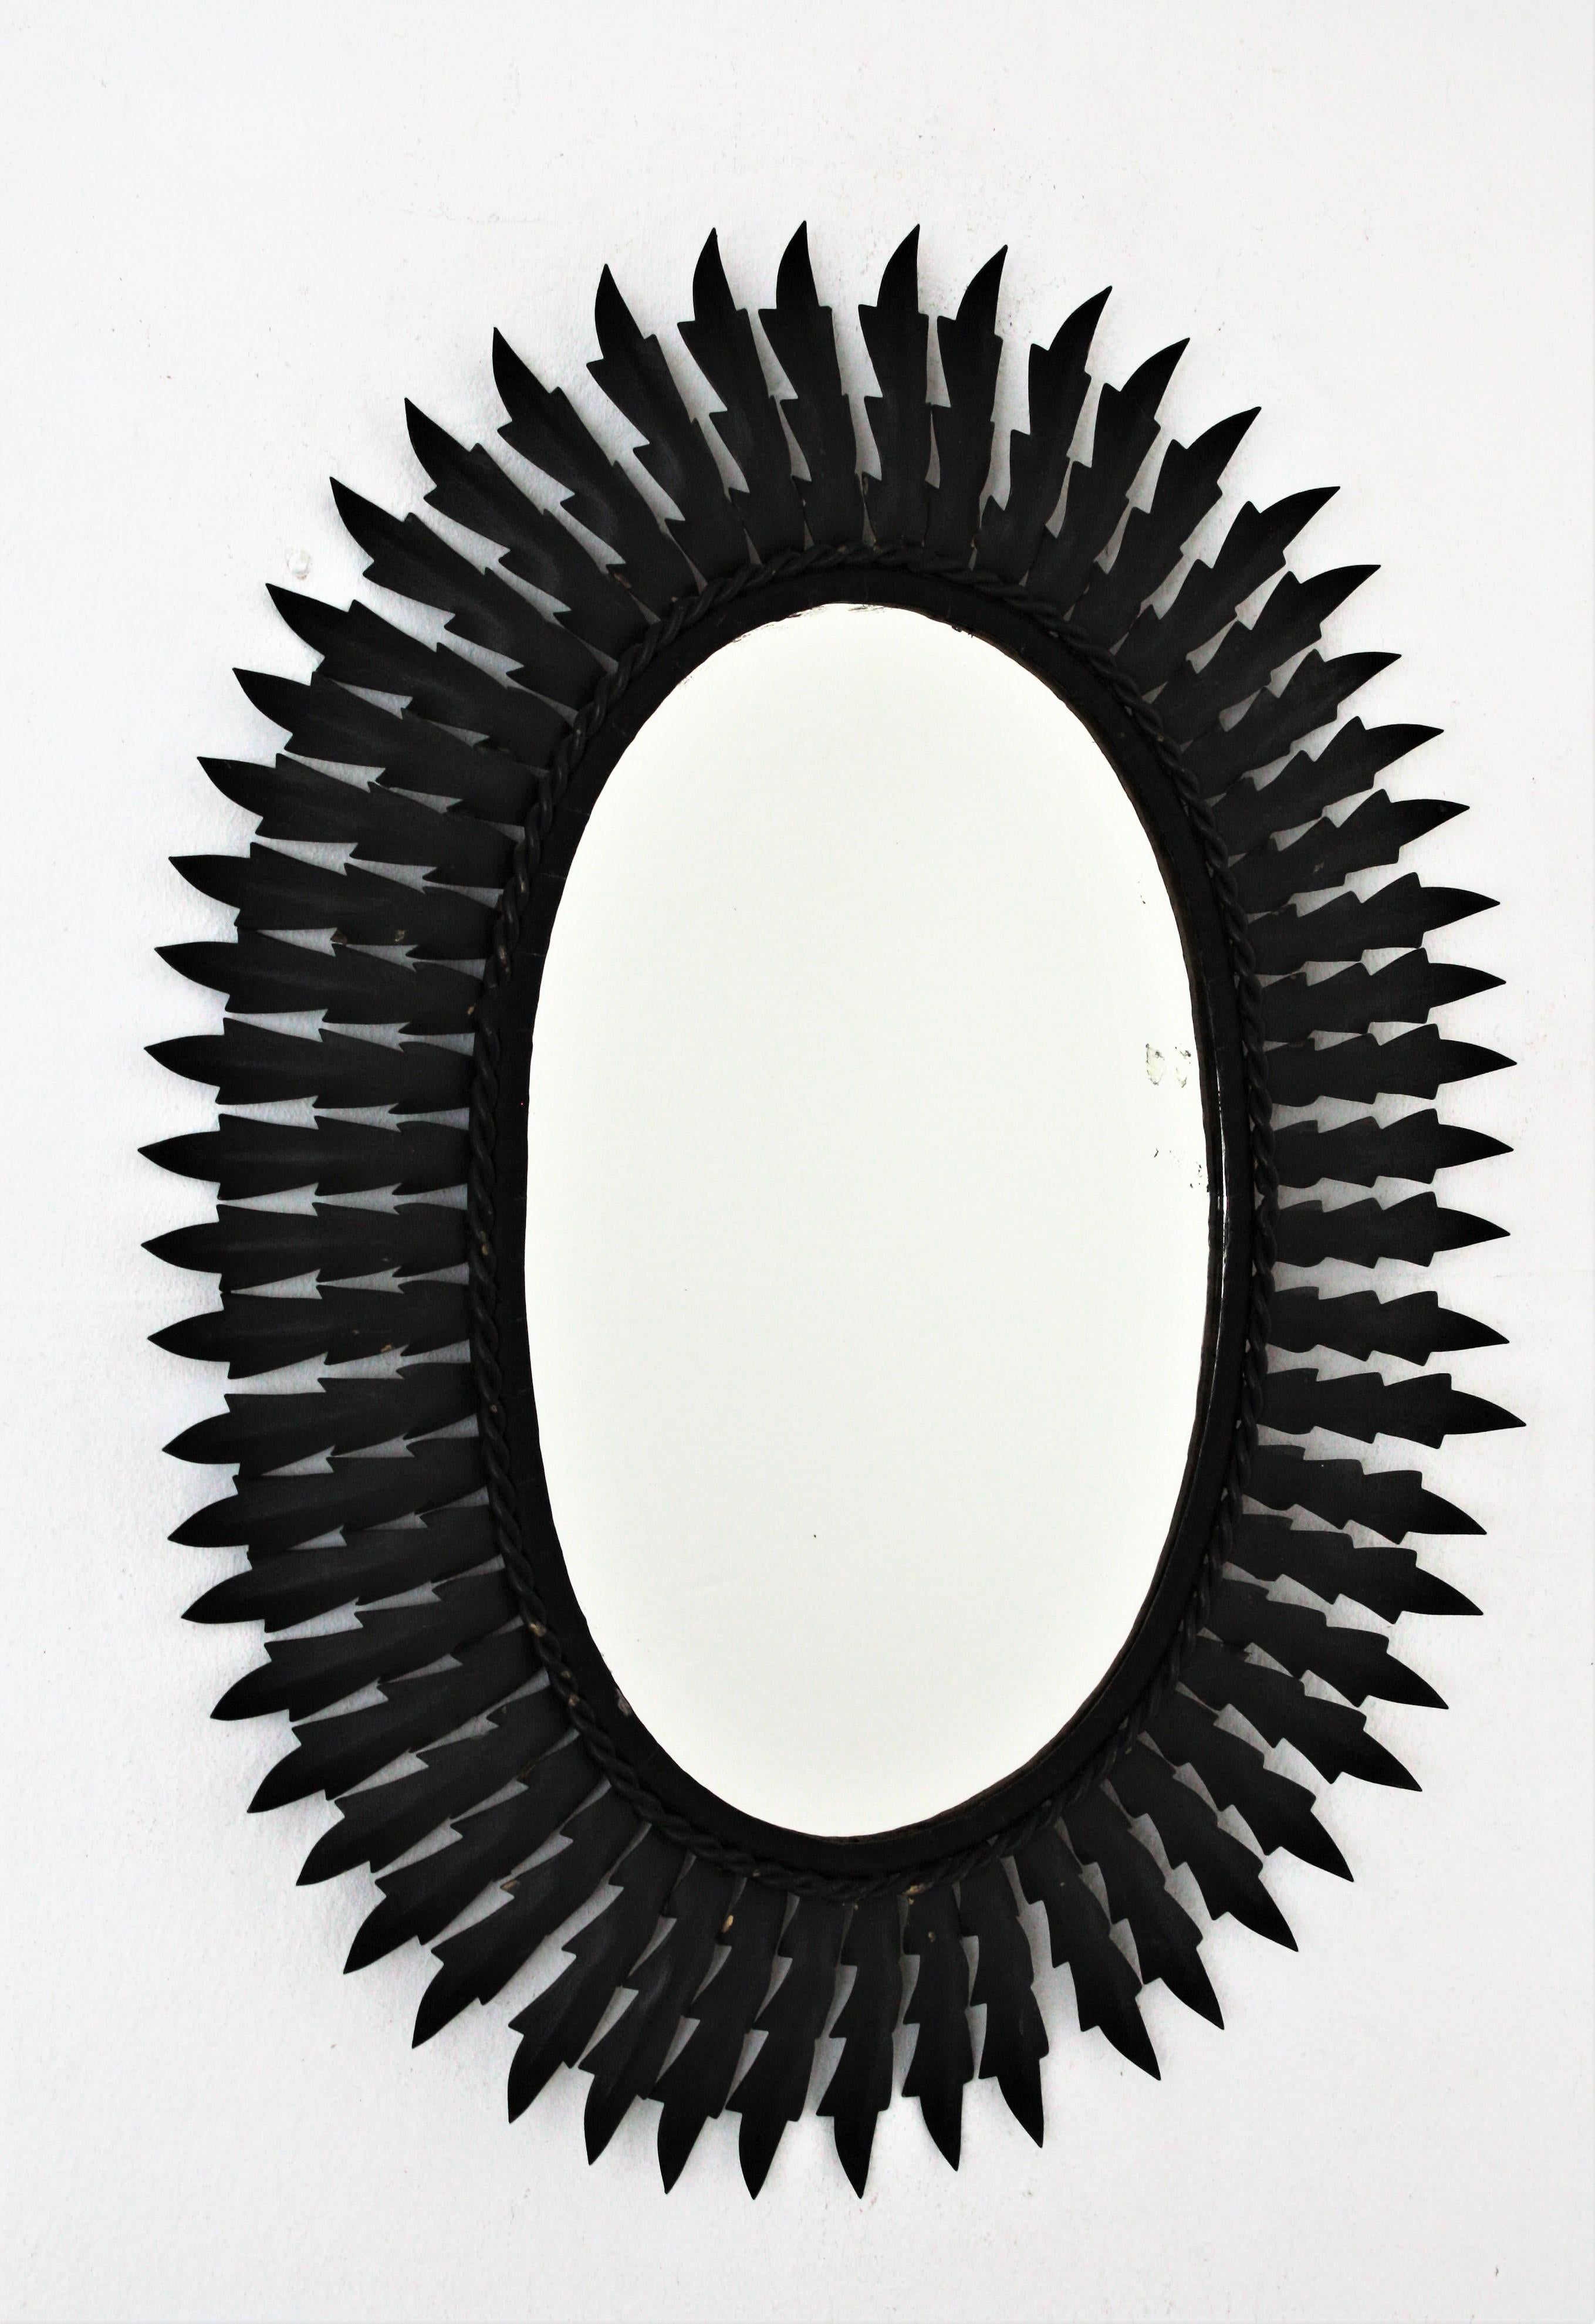 An eye-catching oval sunburst mirror handcrafted in metal with black matte painted finishing. Spain, 1960s.
This wall mirror would be a nice addition wherever you place it, alone or as a part of a wall composition.
Measures: 60 cm H x 47 cm W //